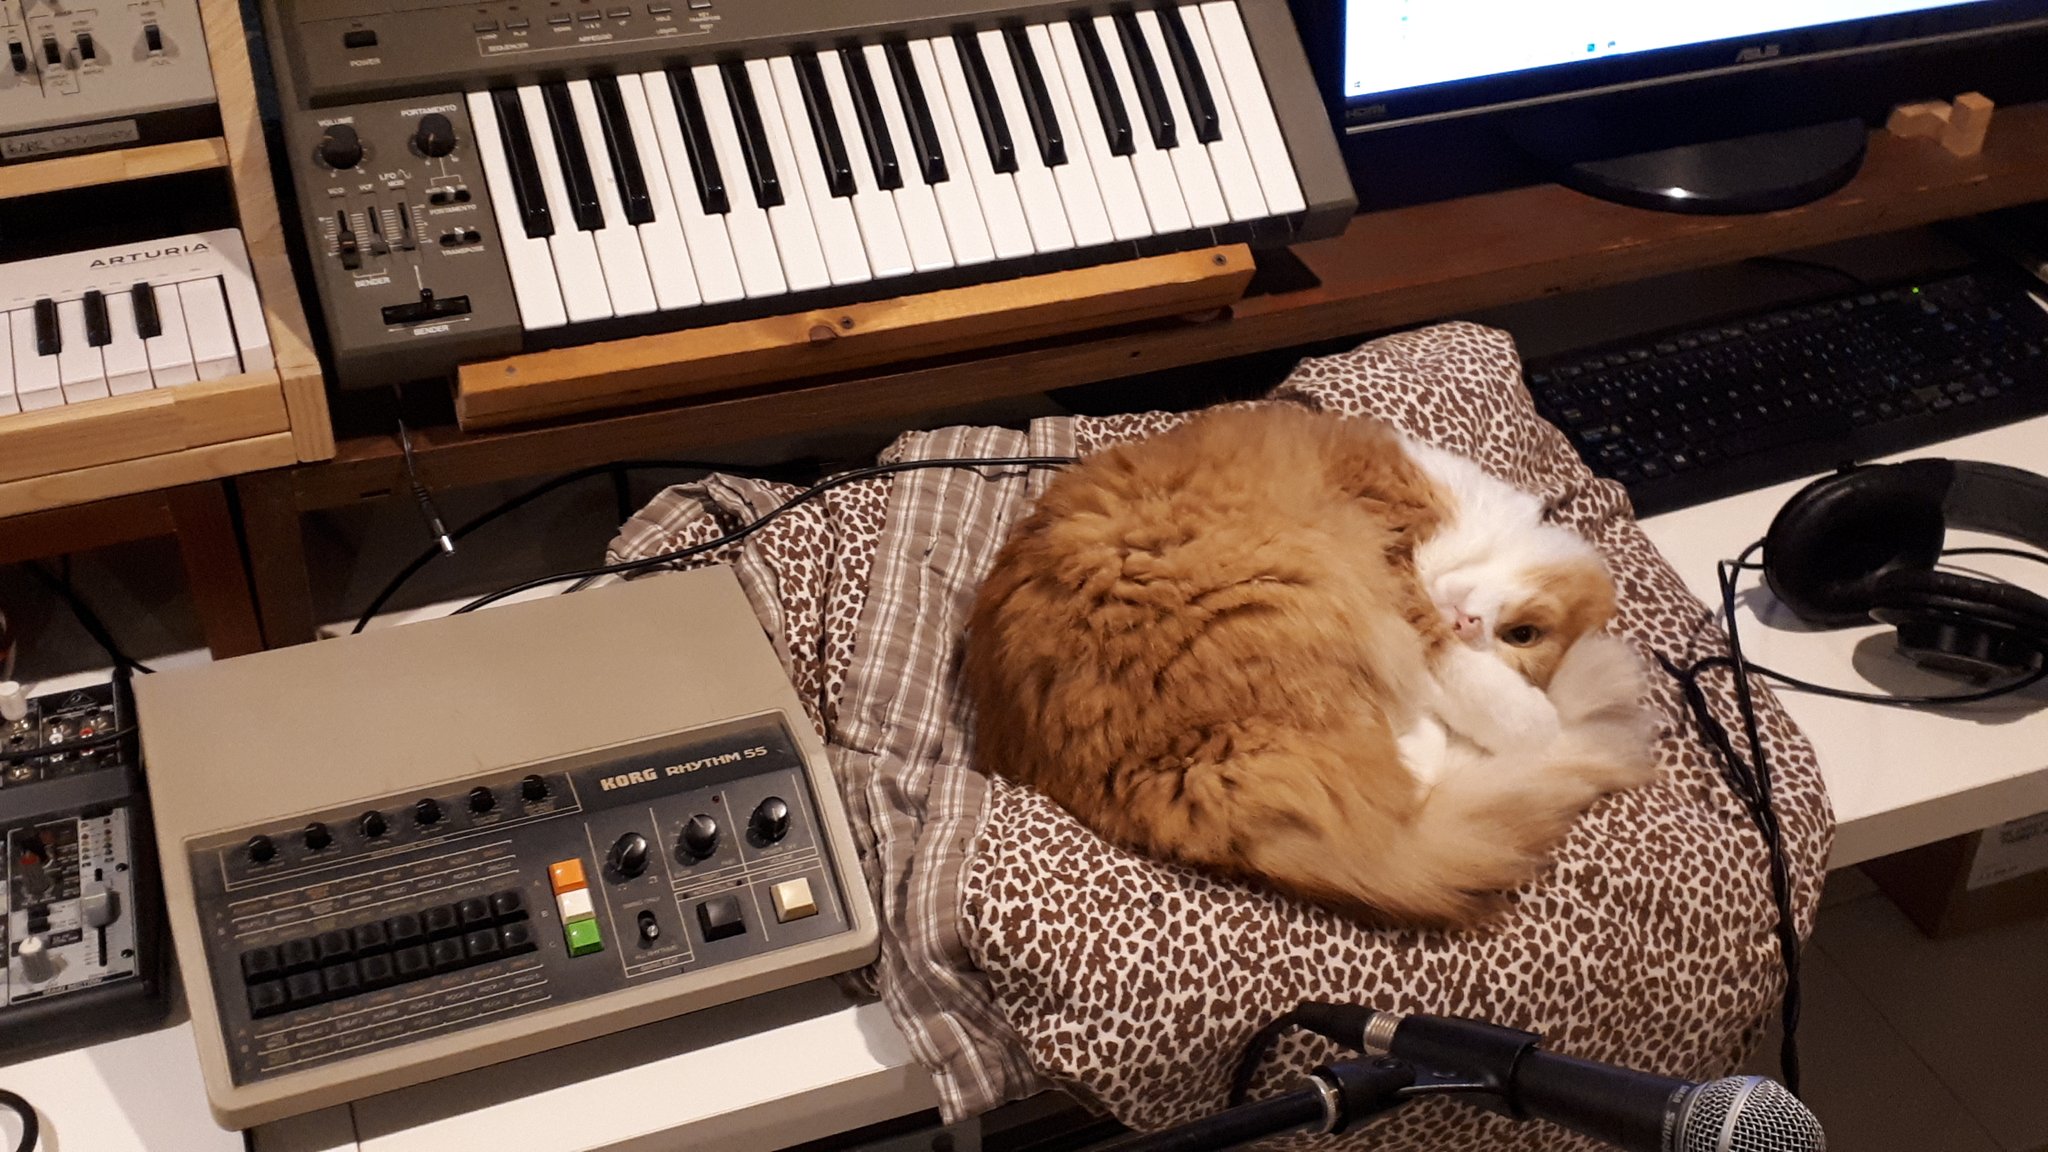 Cleo the cat naps next to a Korg Rhythm 55 drum machine.  Above is a Roland SH-101 synthesizer and arturia keyboard.